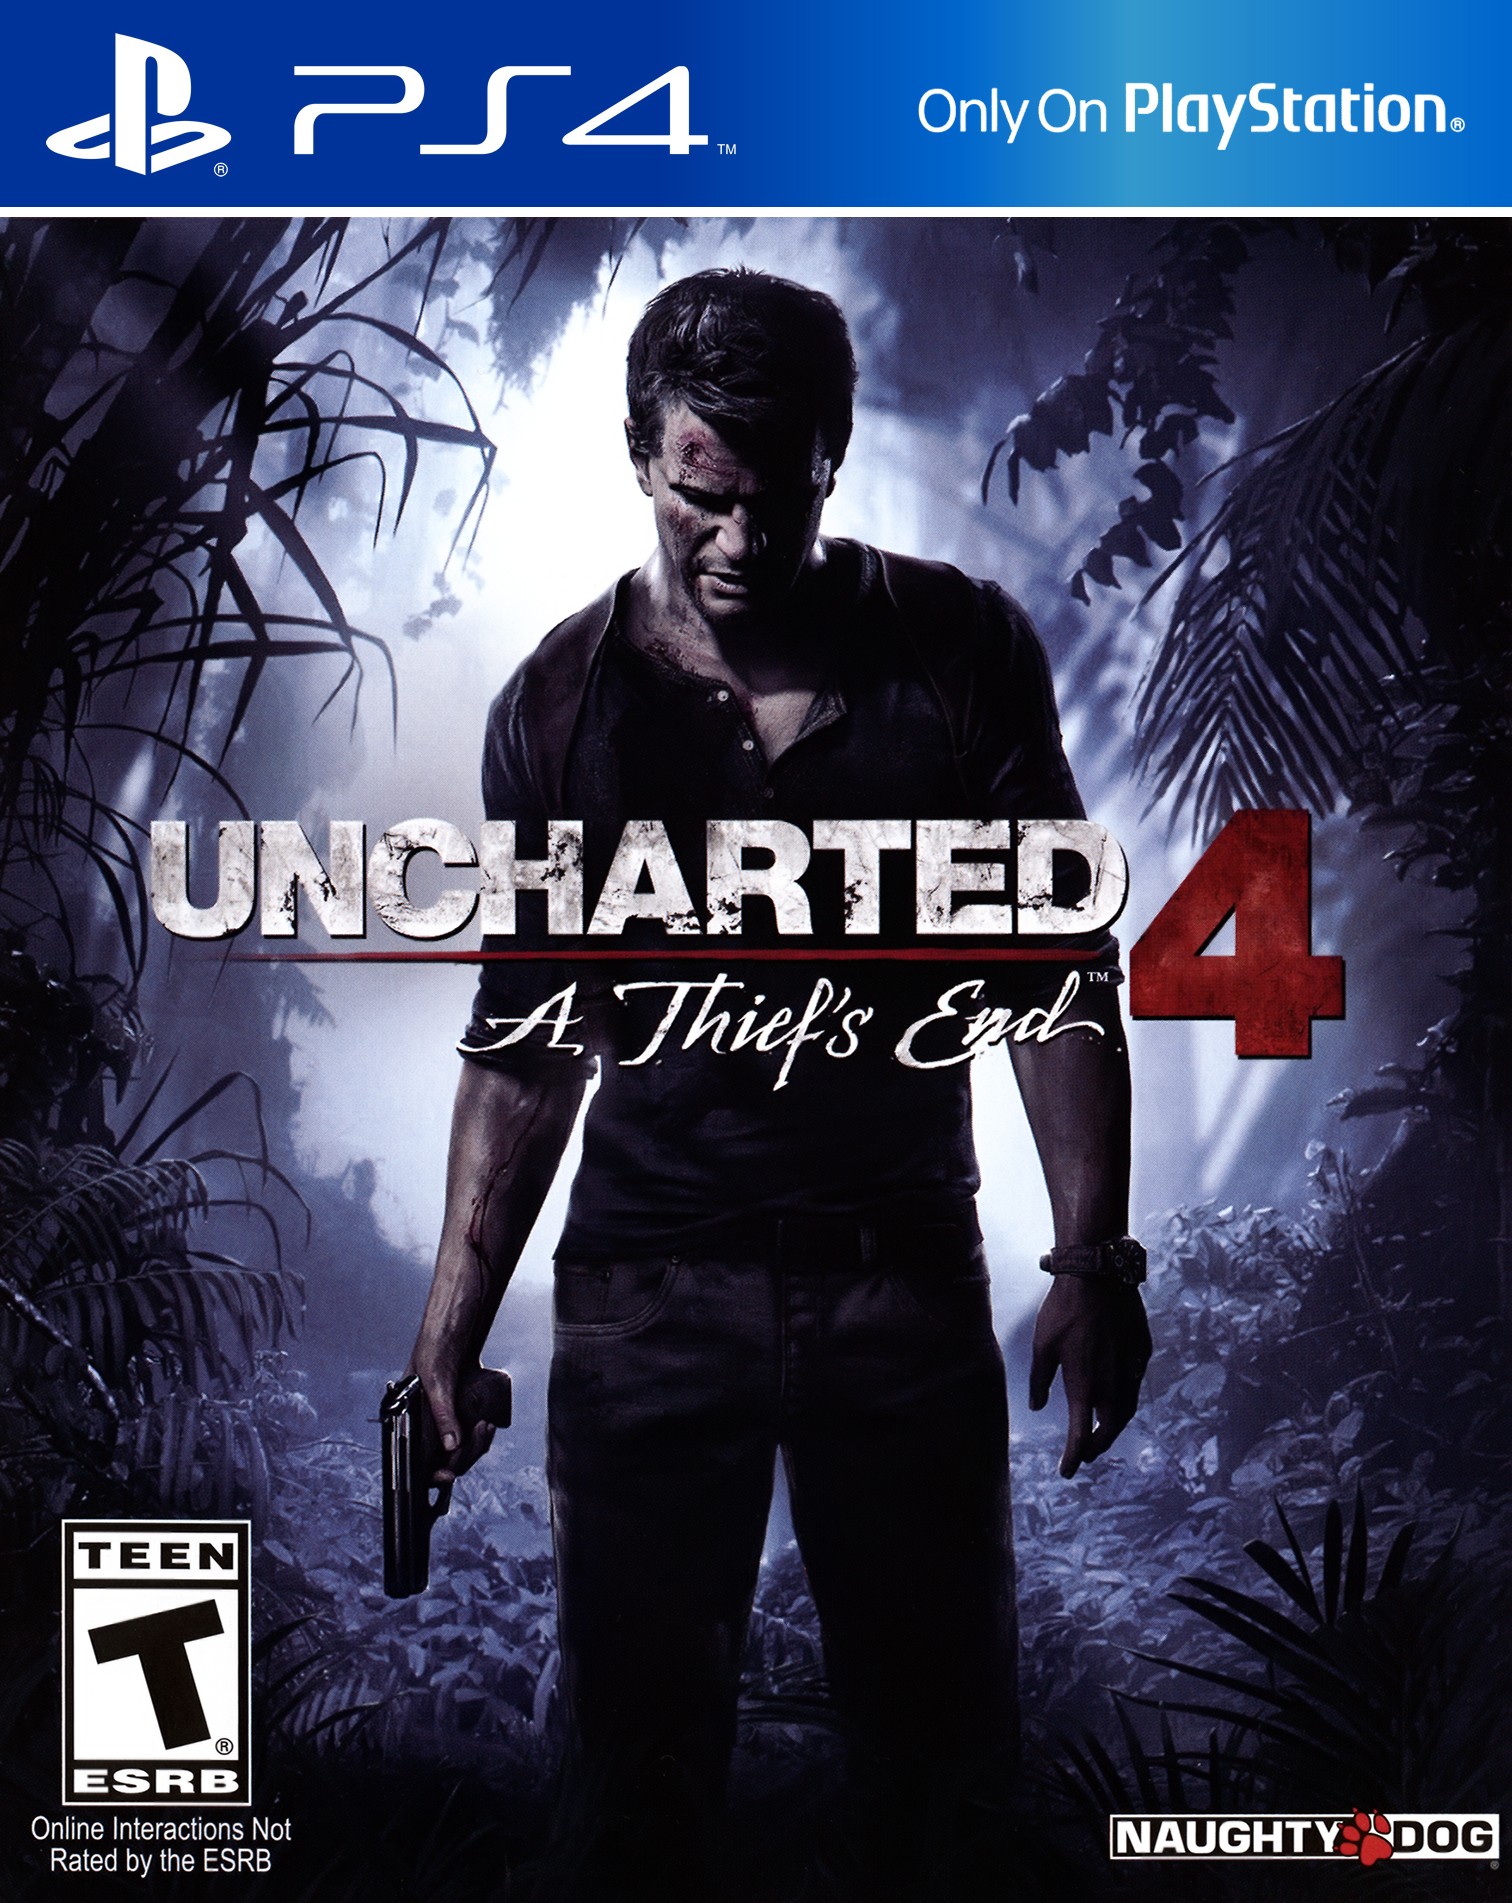 'Uncharted 4: A Thief's End'